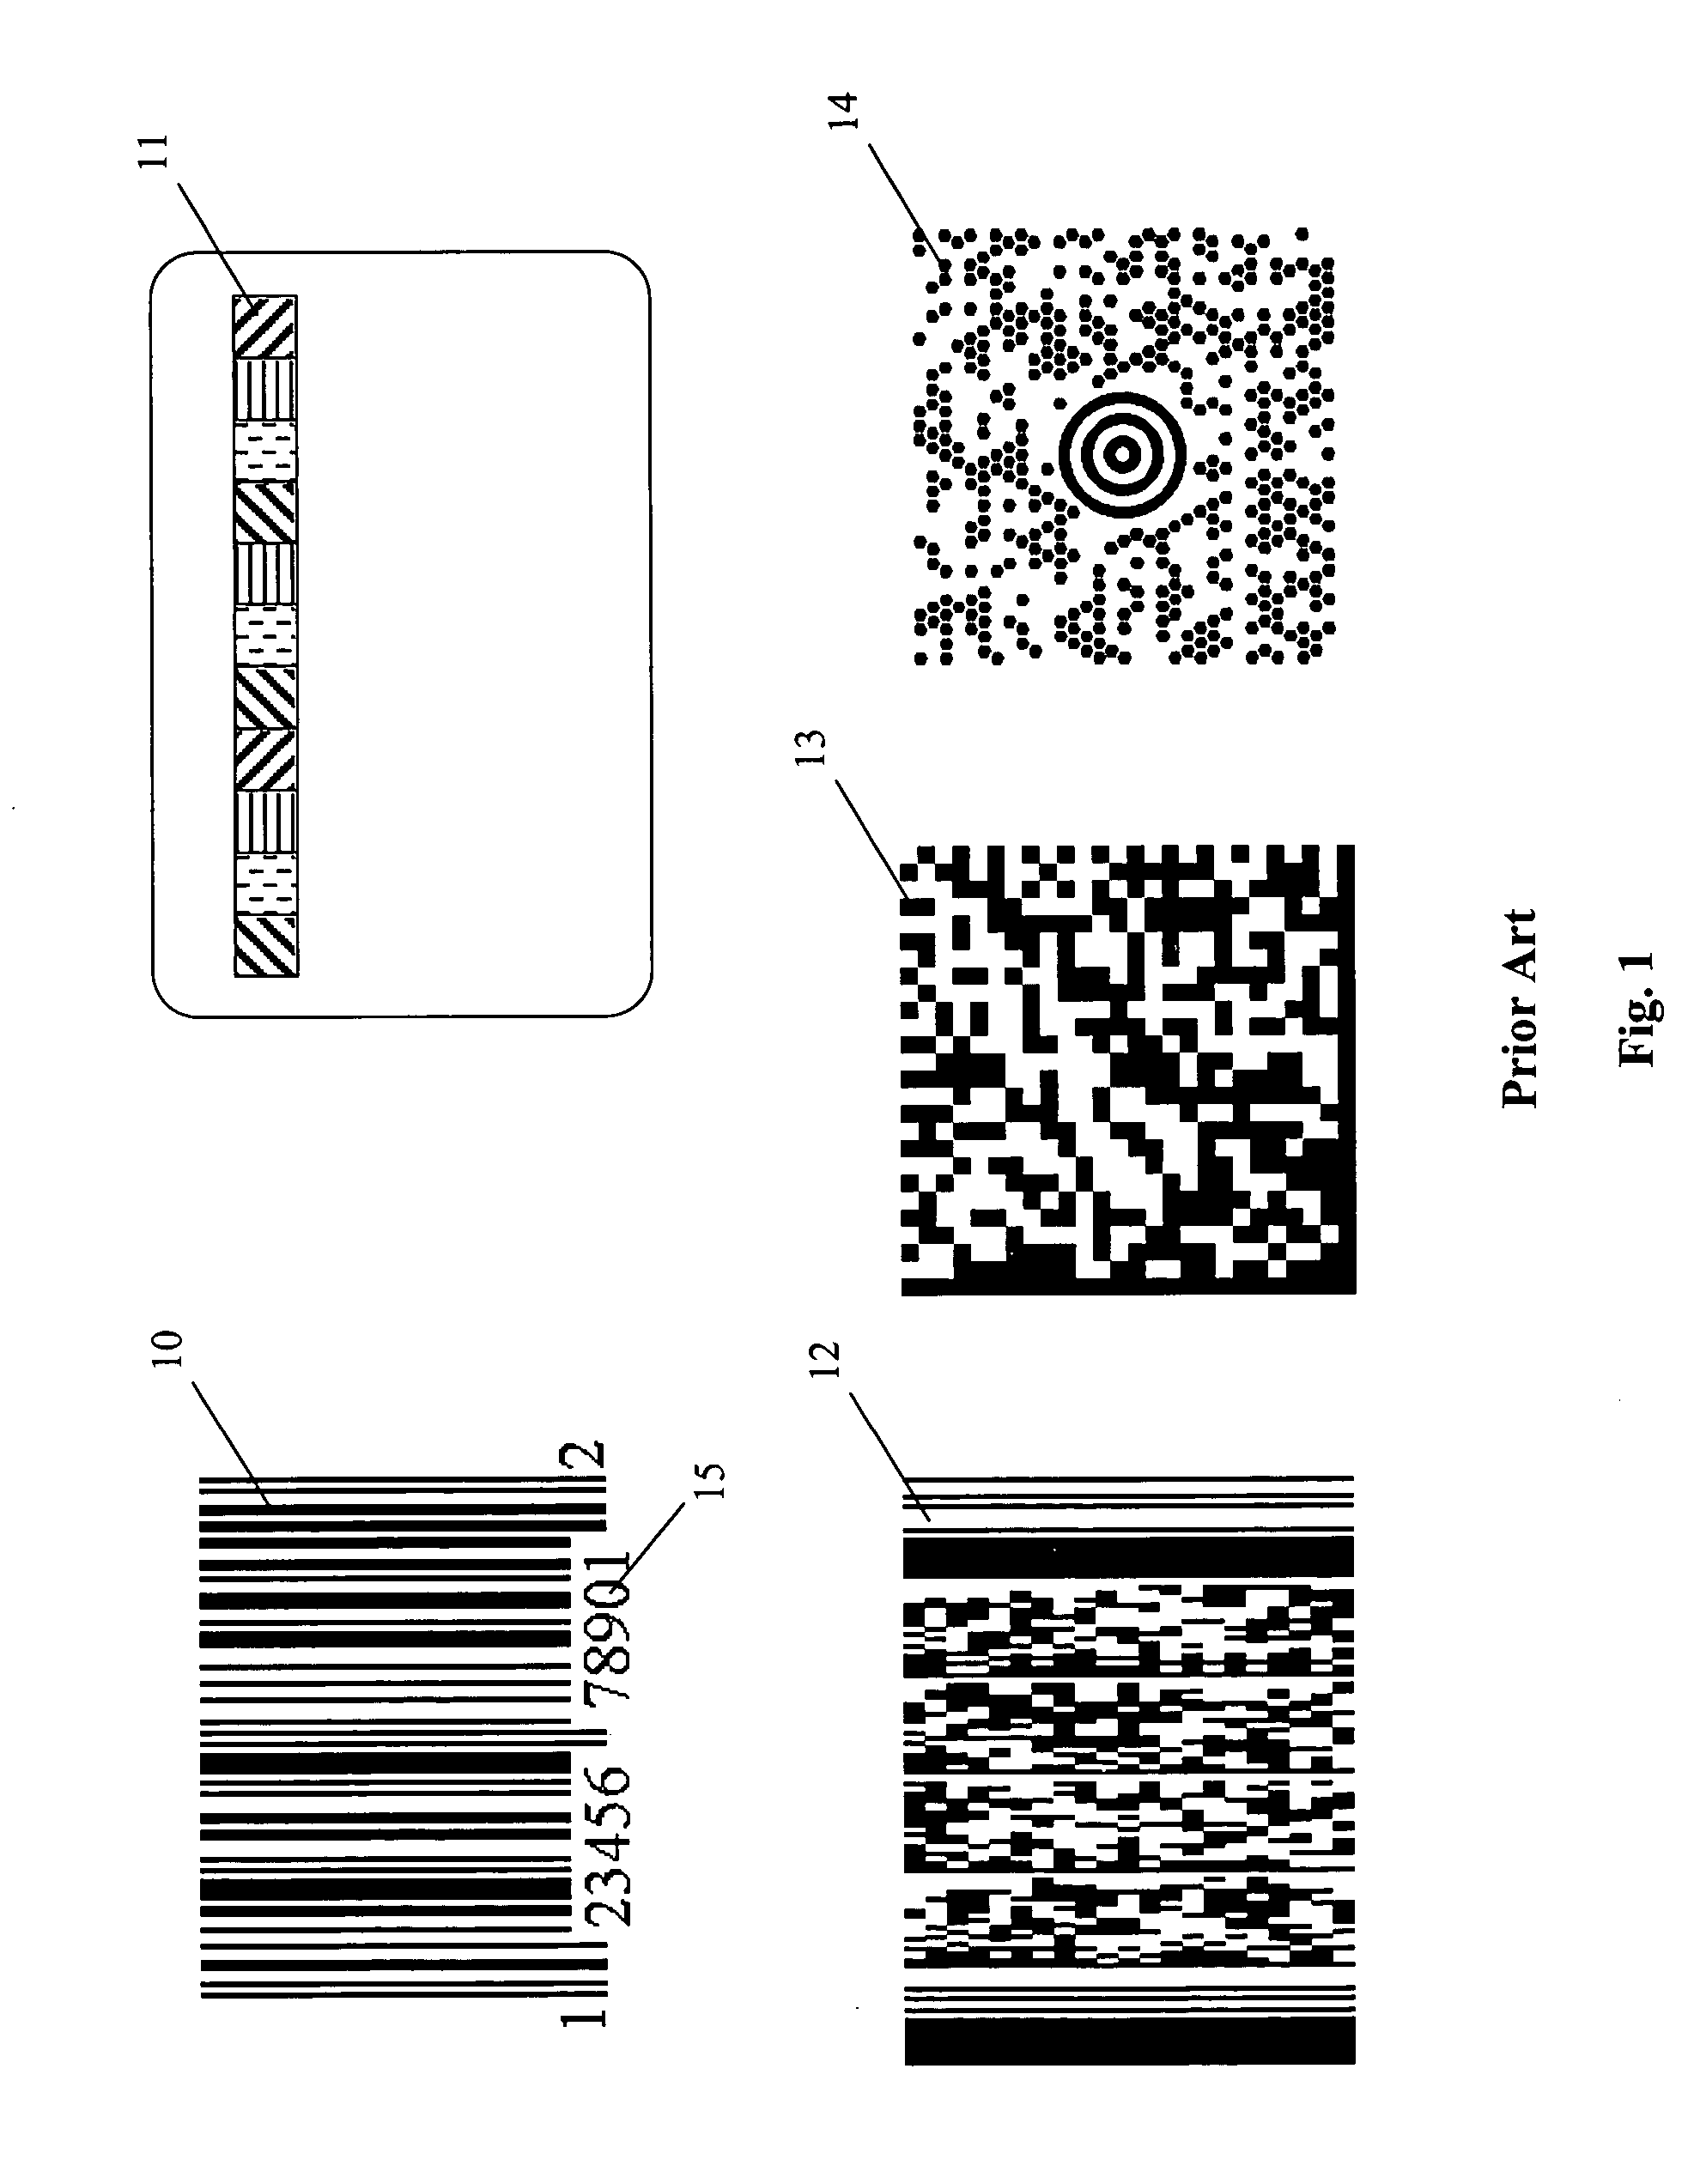 Coaligned bar codes and validation means